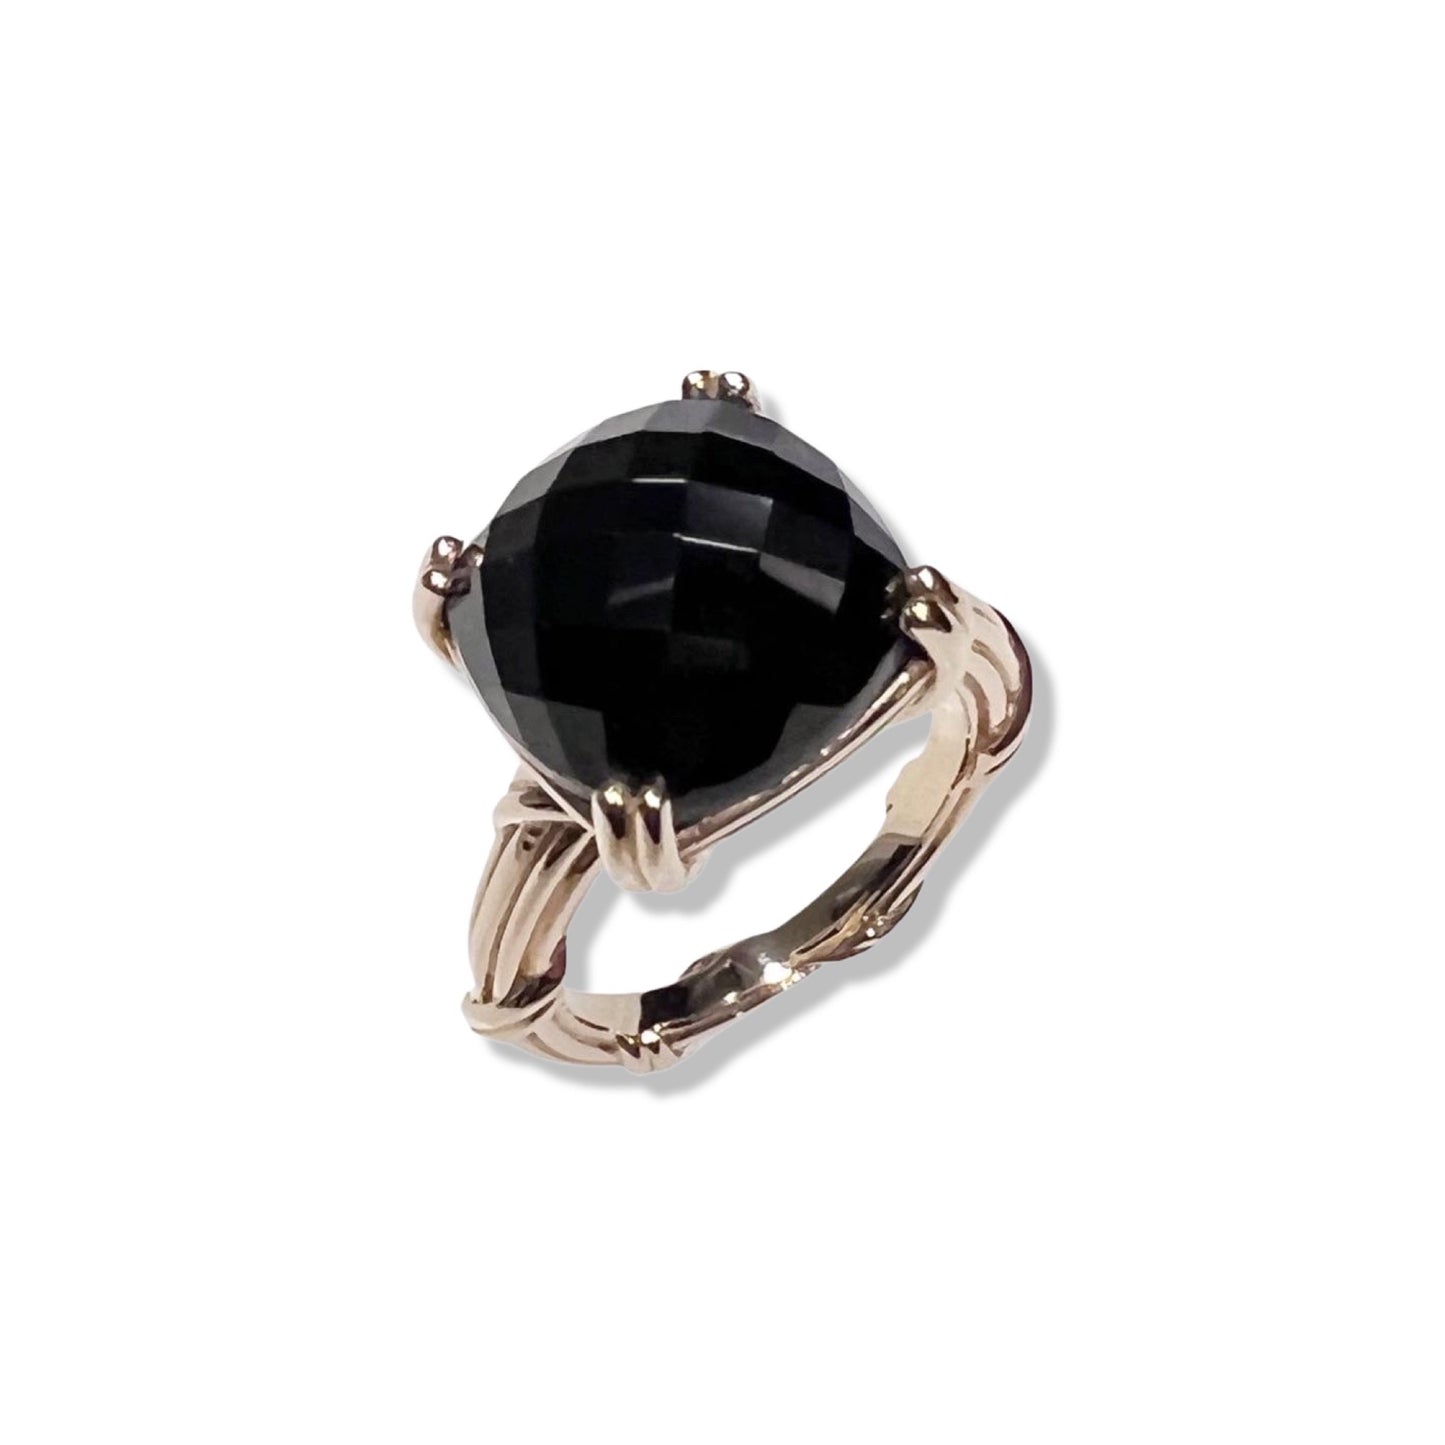 Fantasies Cushion Cut Black Onyx Cocktail Ring in 18k yellow gold 14mm